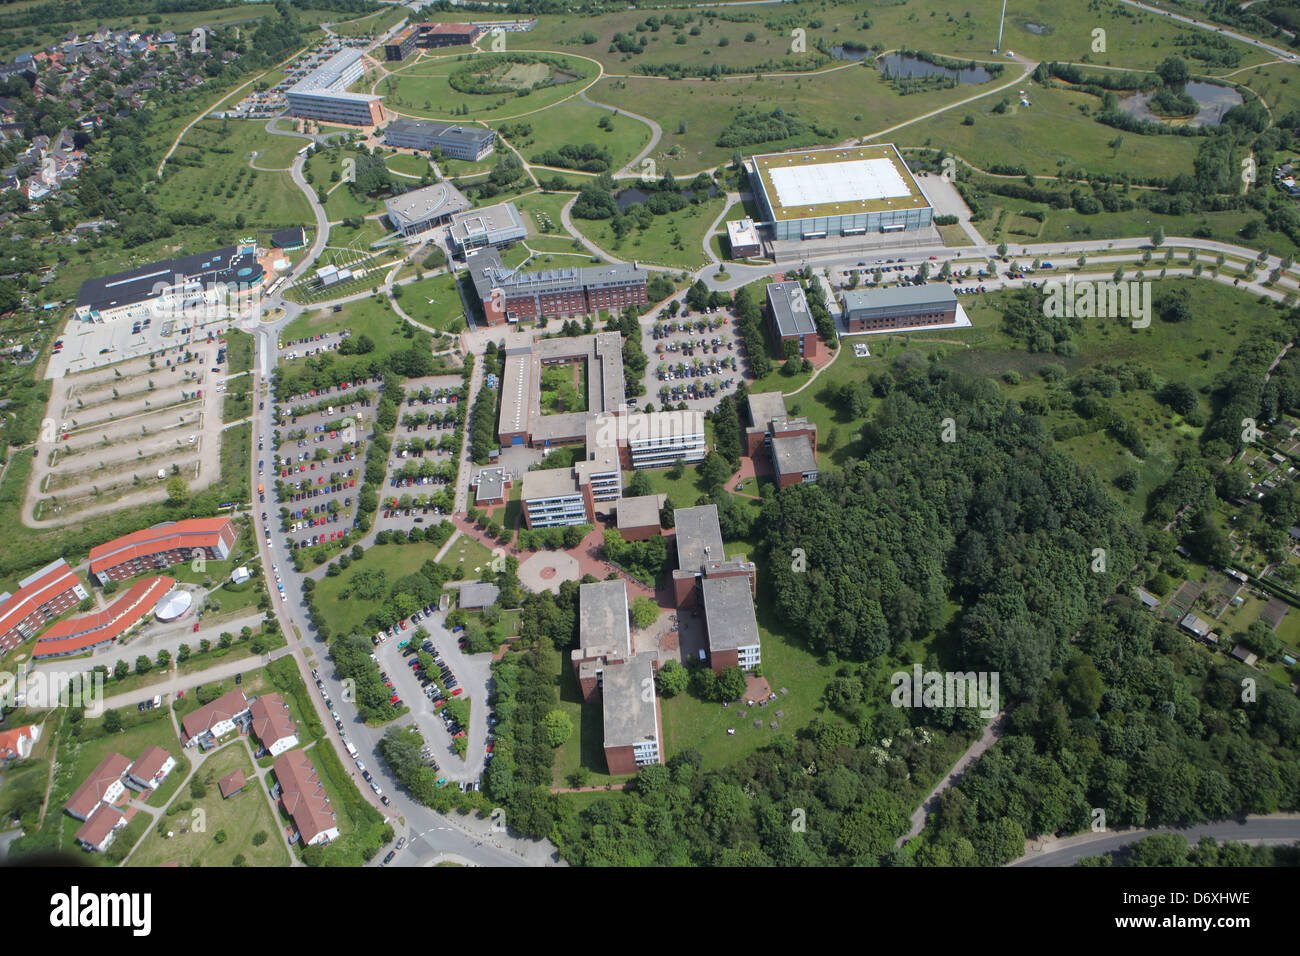 Flensburg, Germany, aerial view of Flensburg overlooking the campus Stock Photo